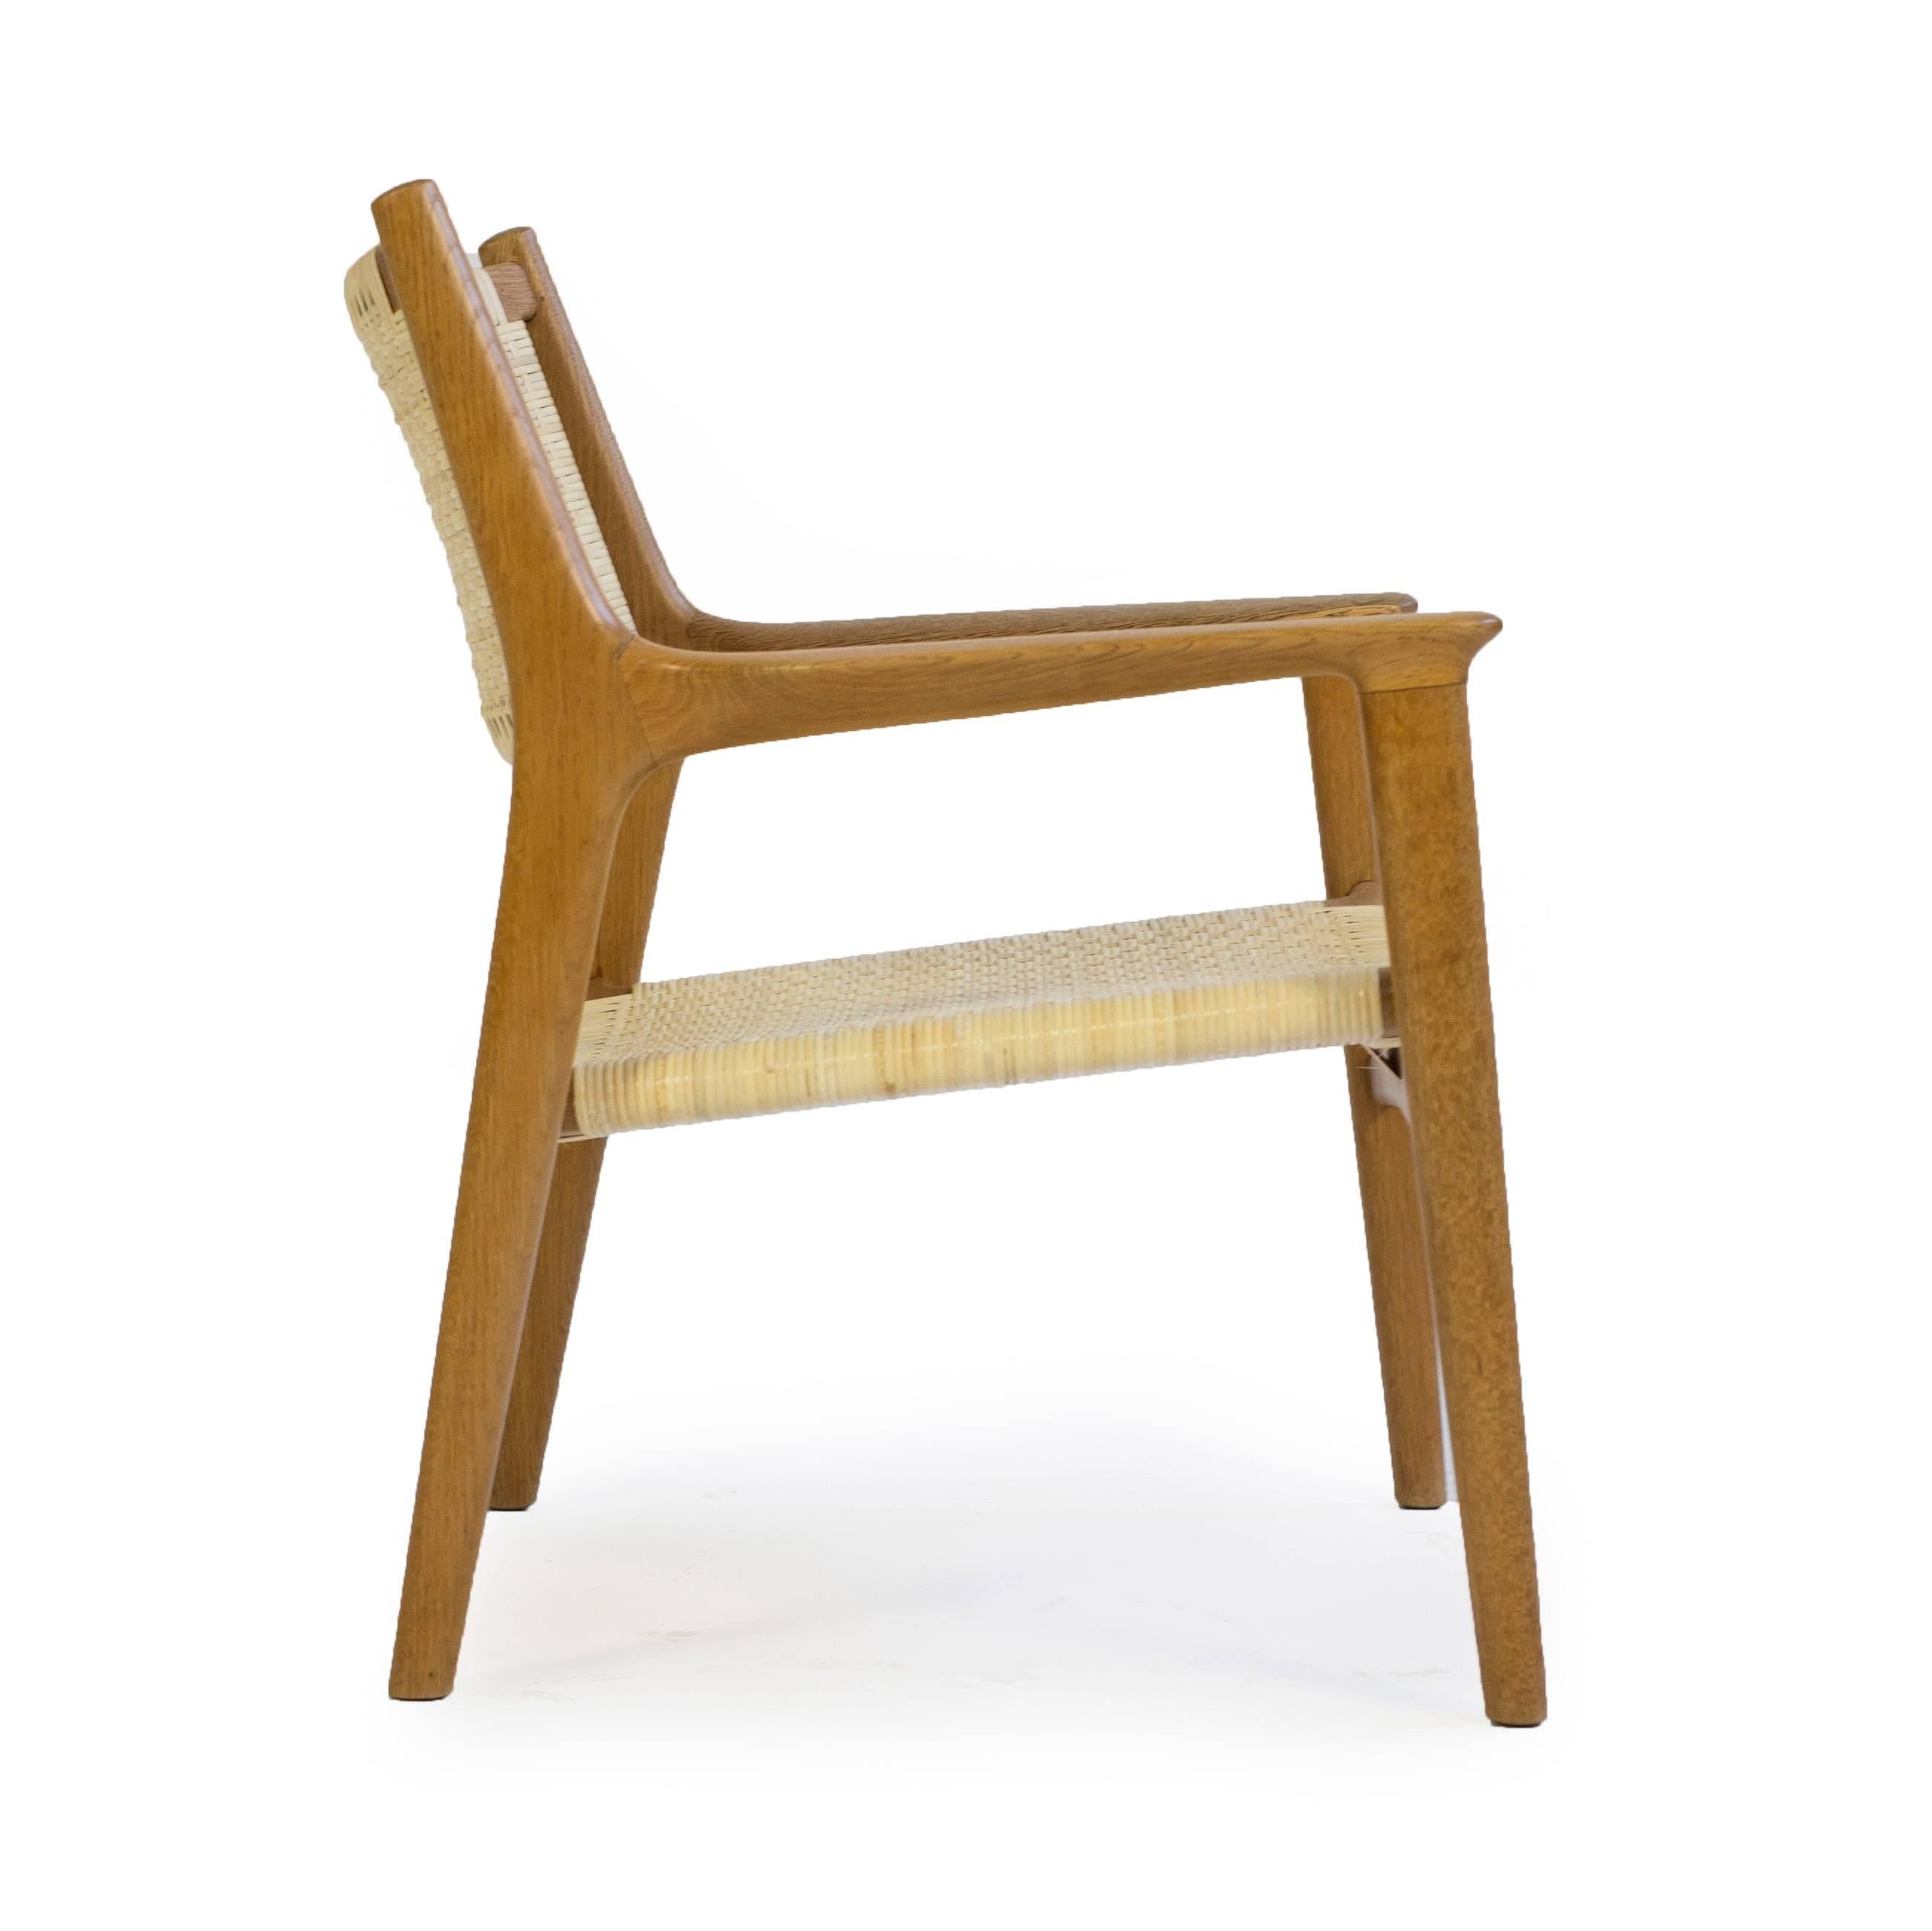 A rarely seen Hans J. Wegner oak arm chair. 

Seat and back with new woven cane

Designed by Hans J. Wegner 1951, executed by cabinetmaker Johannes Hansen, Denmark, model JH 516. 

Very fine restored condition. 